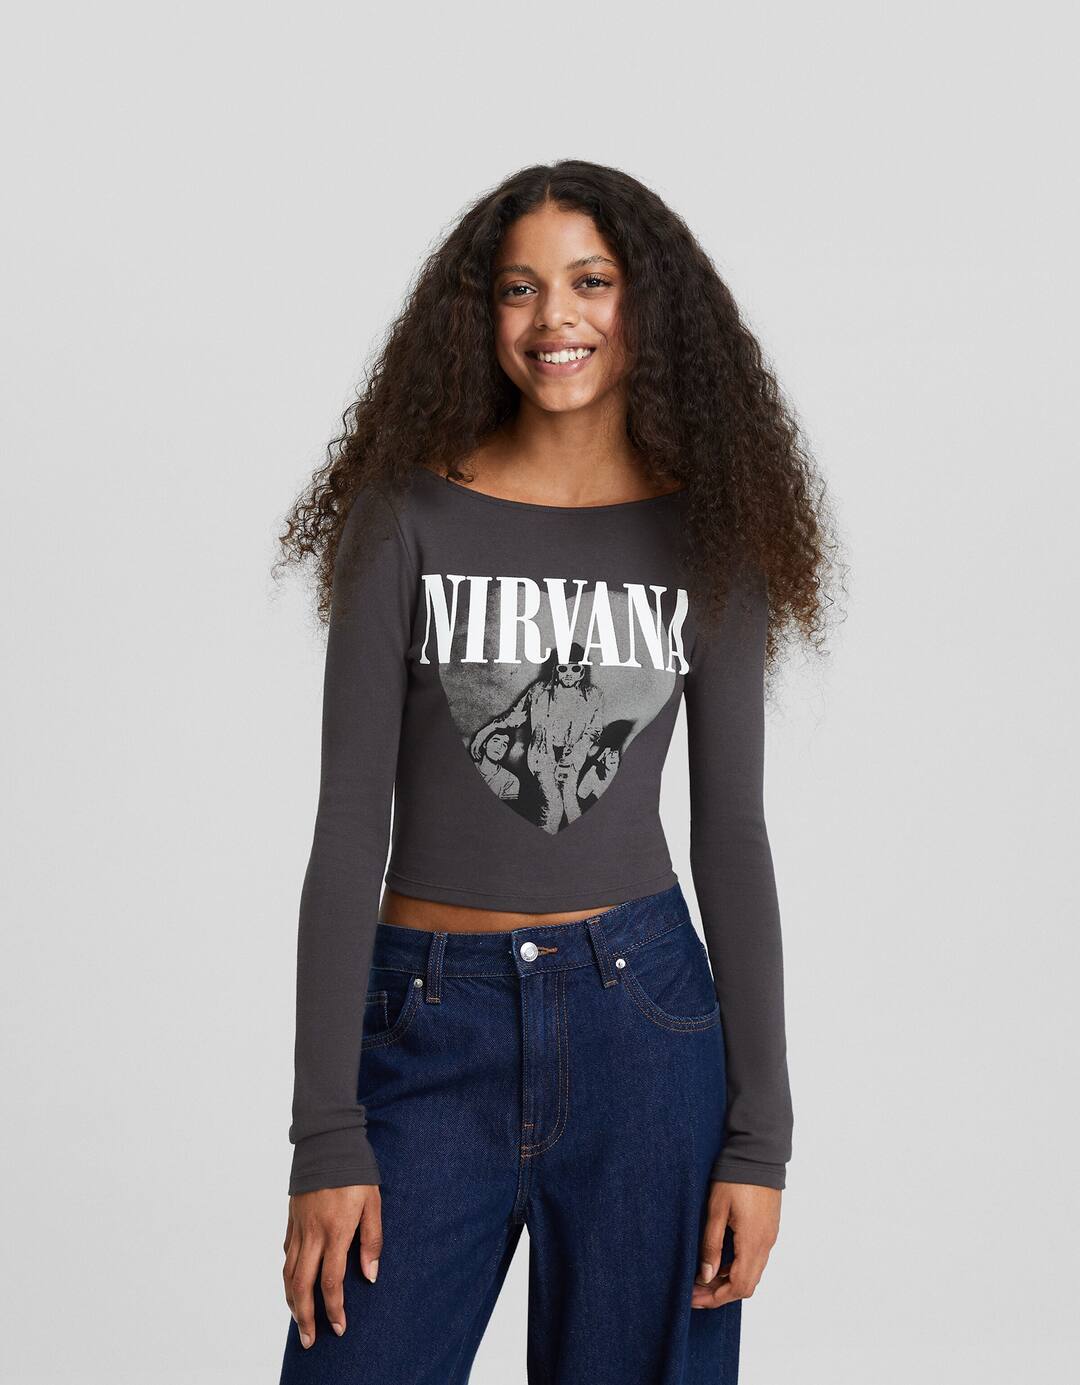 Nirvana T-shirt with long sleeves and open back with print